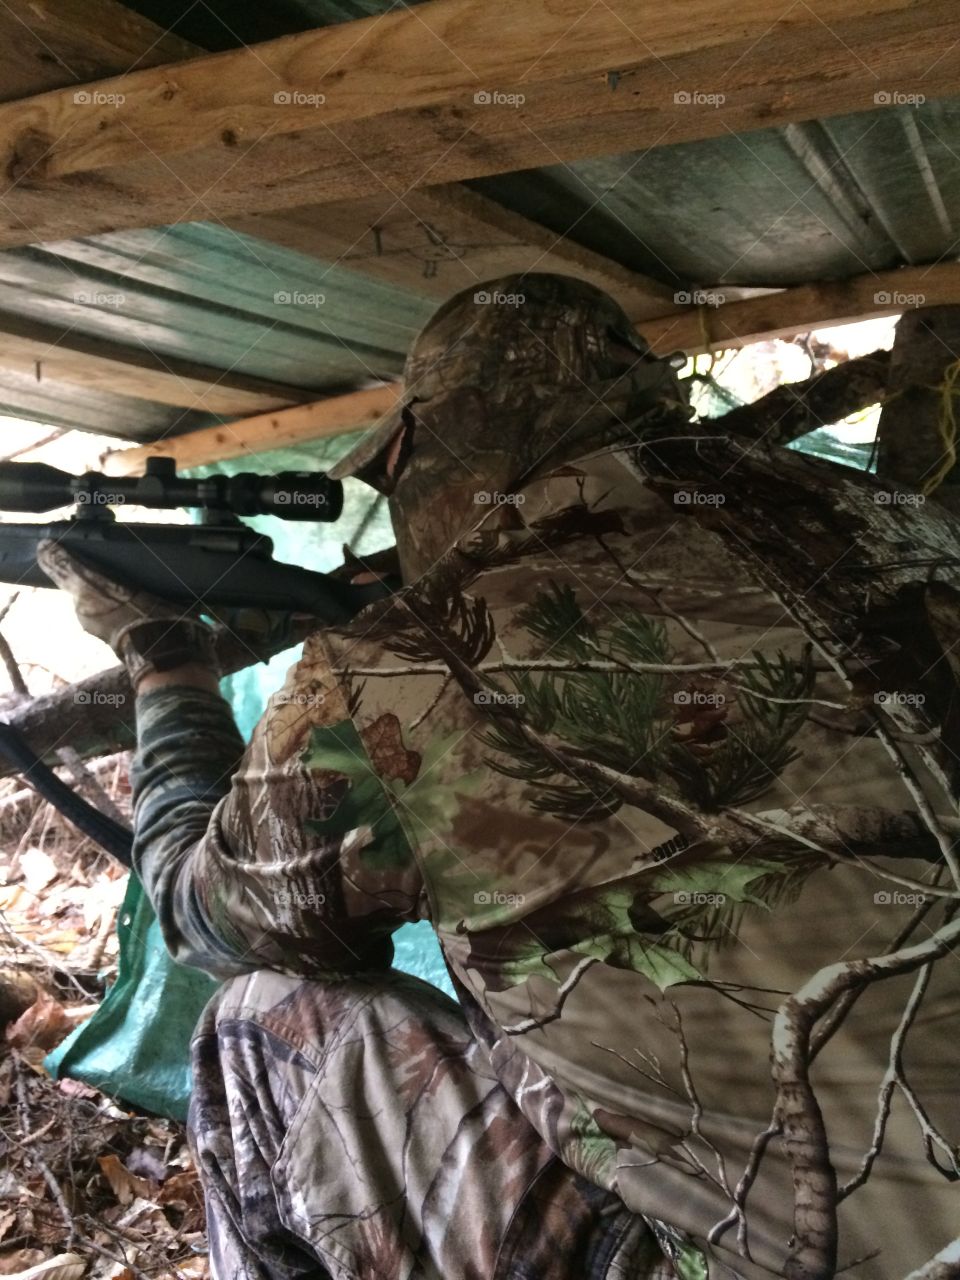 Lining up the scope on the 30-06 Savage Axis in a ground stand